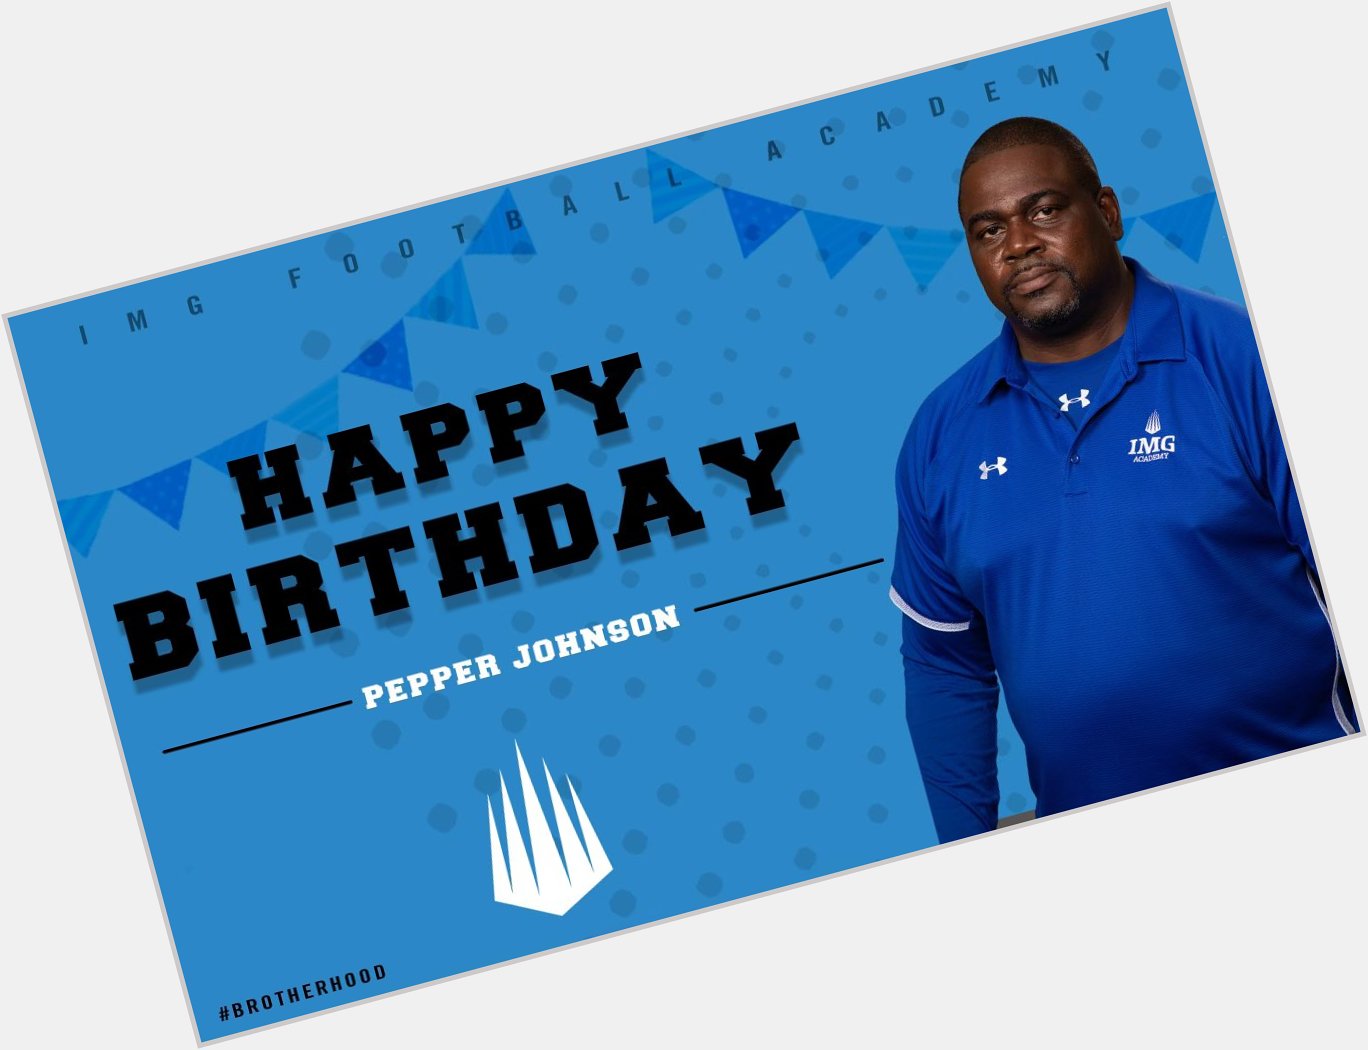 Happy Birthday to our National Team head coach, Pepper Johnson! 